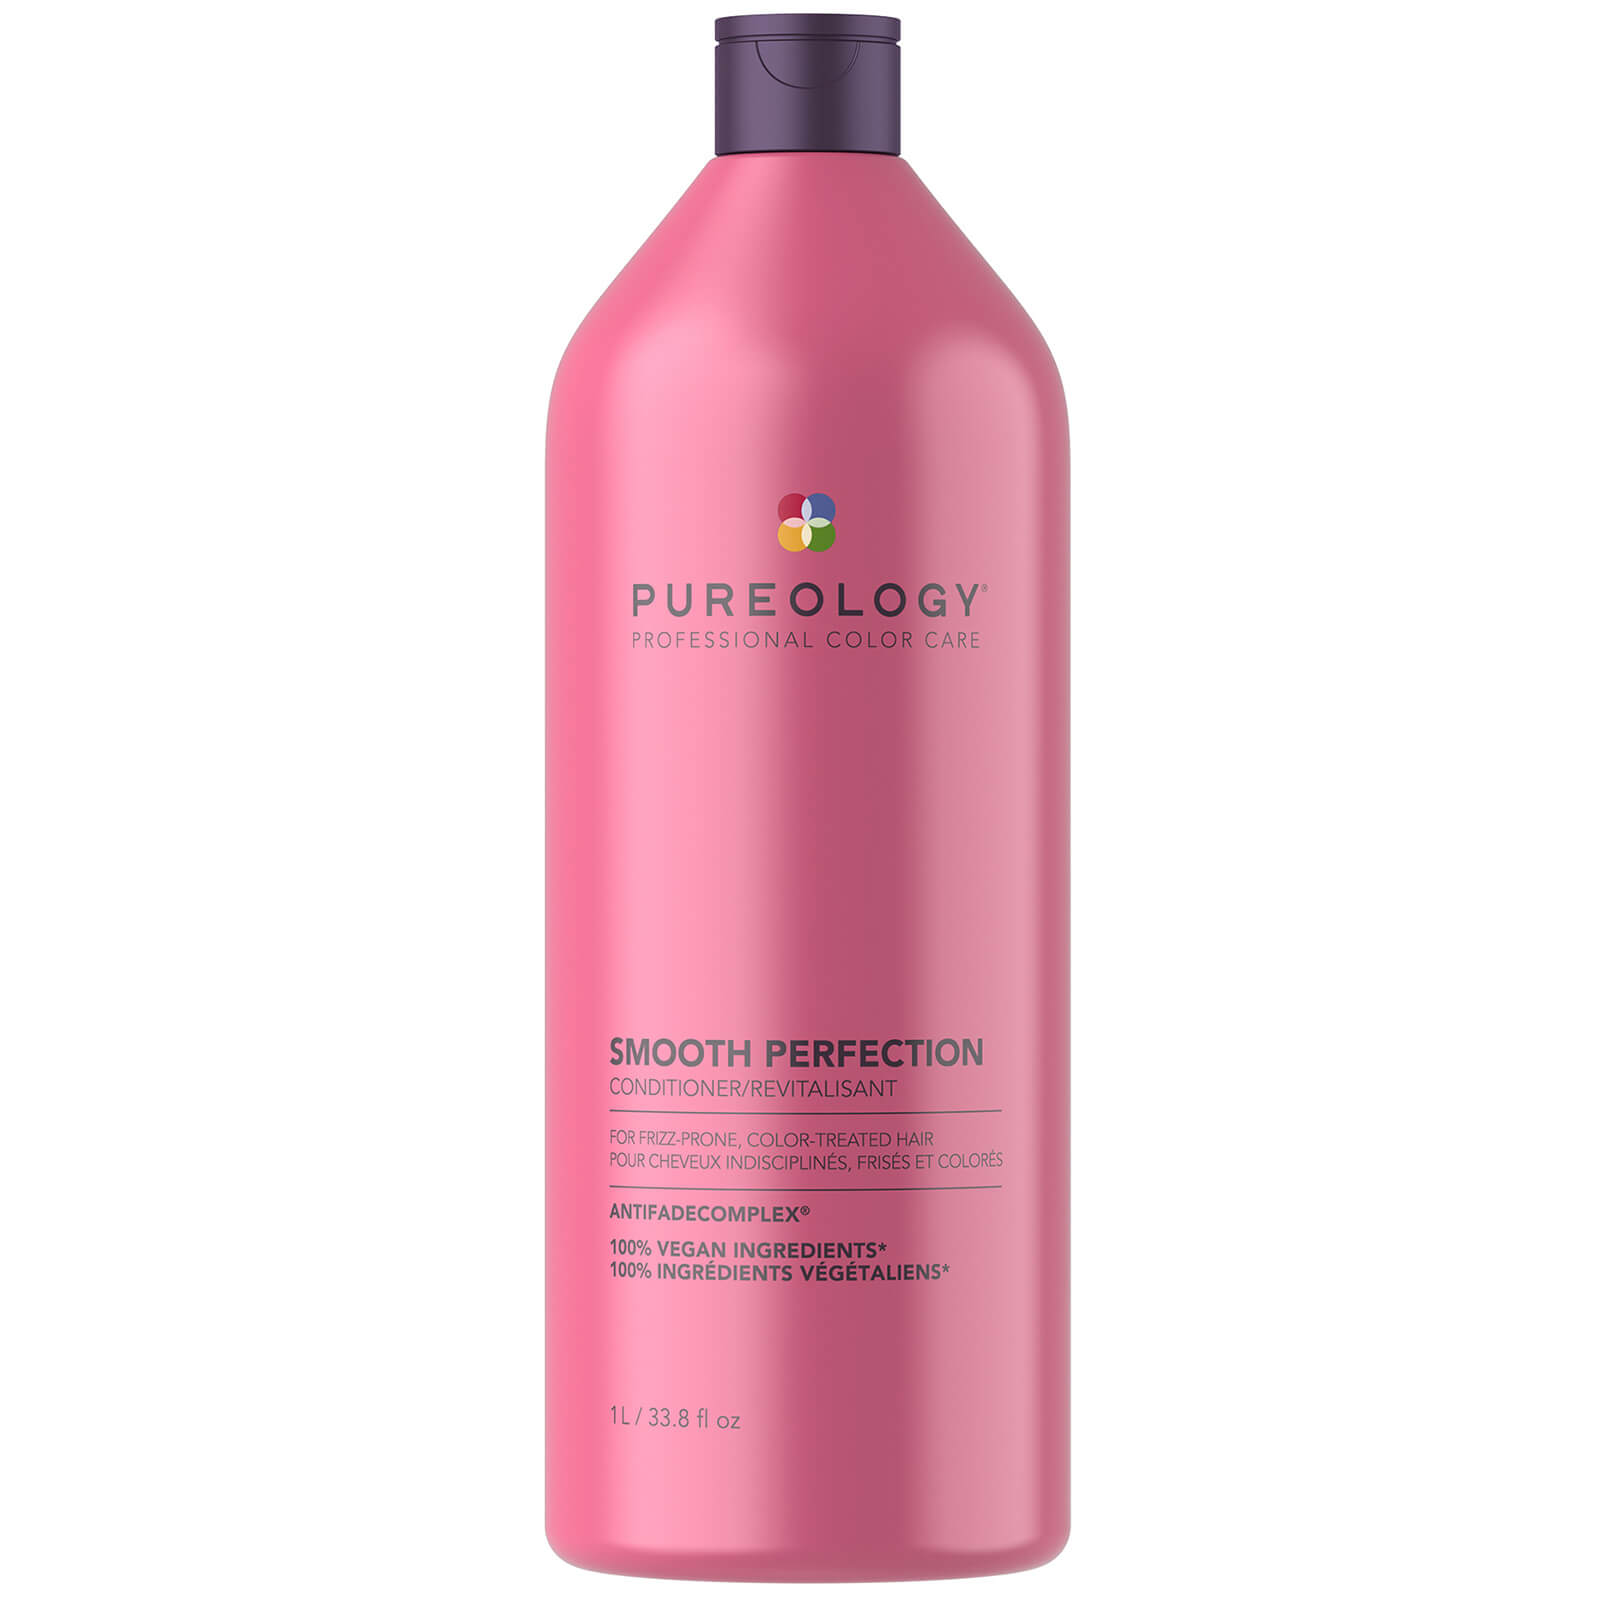 Pureology Smooth Perfection Conditioner 1000ml product